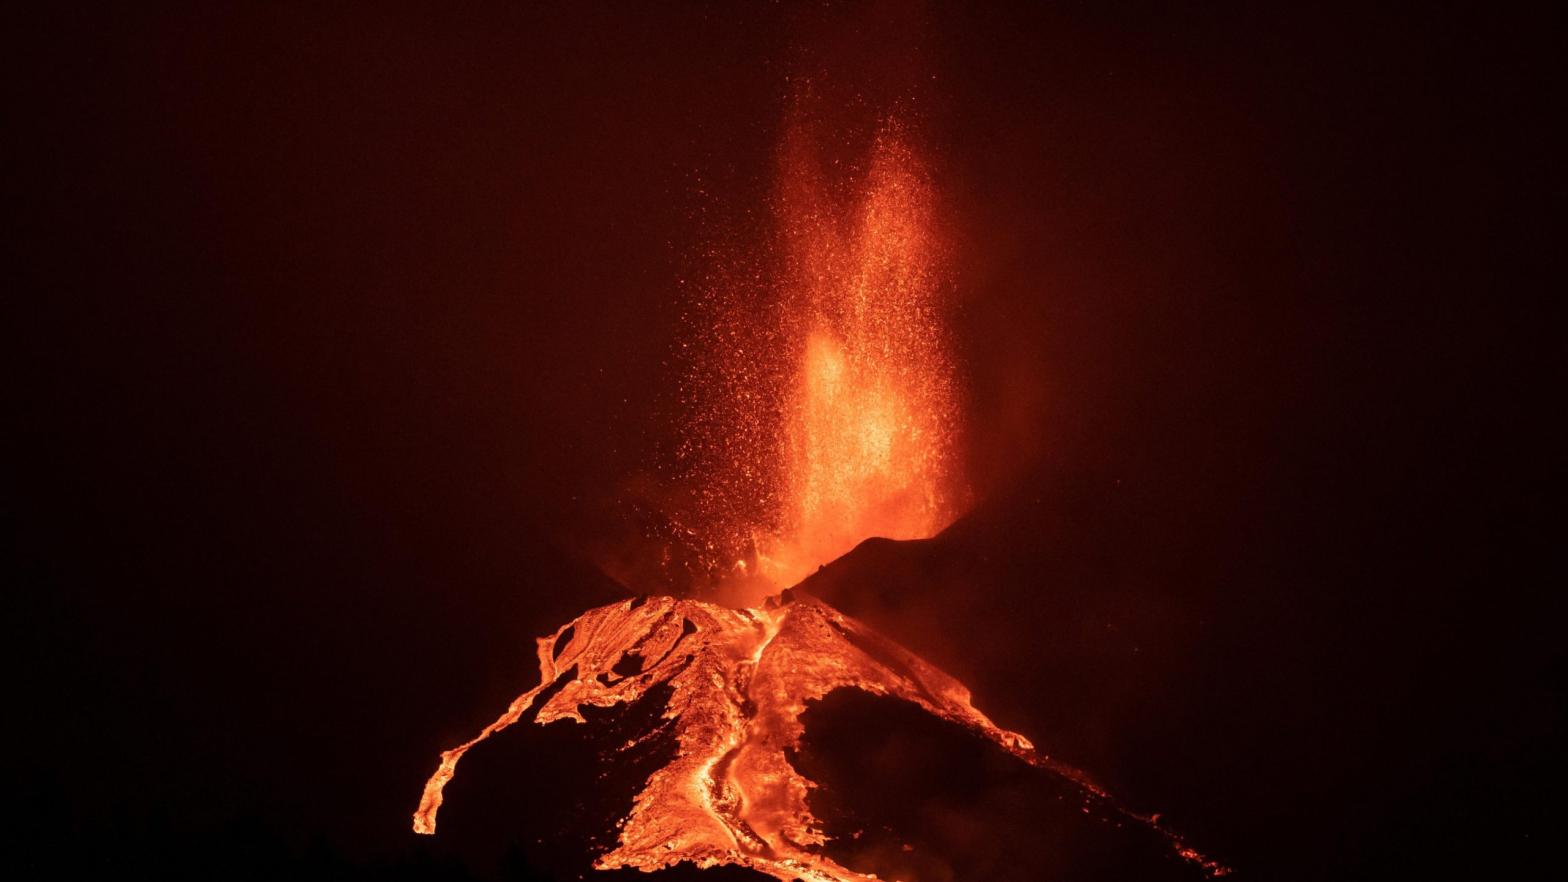 Lava flows after the collapse of a part of the cone of the Cumbre Vieja Volcano on Oct. 10, 2021 in La Palma, Spain. (Photo: Marcos del Mazo, Getty Images)